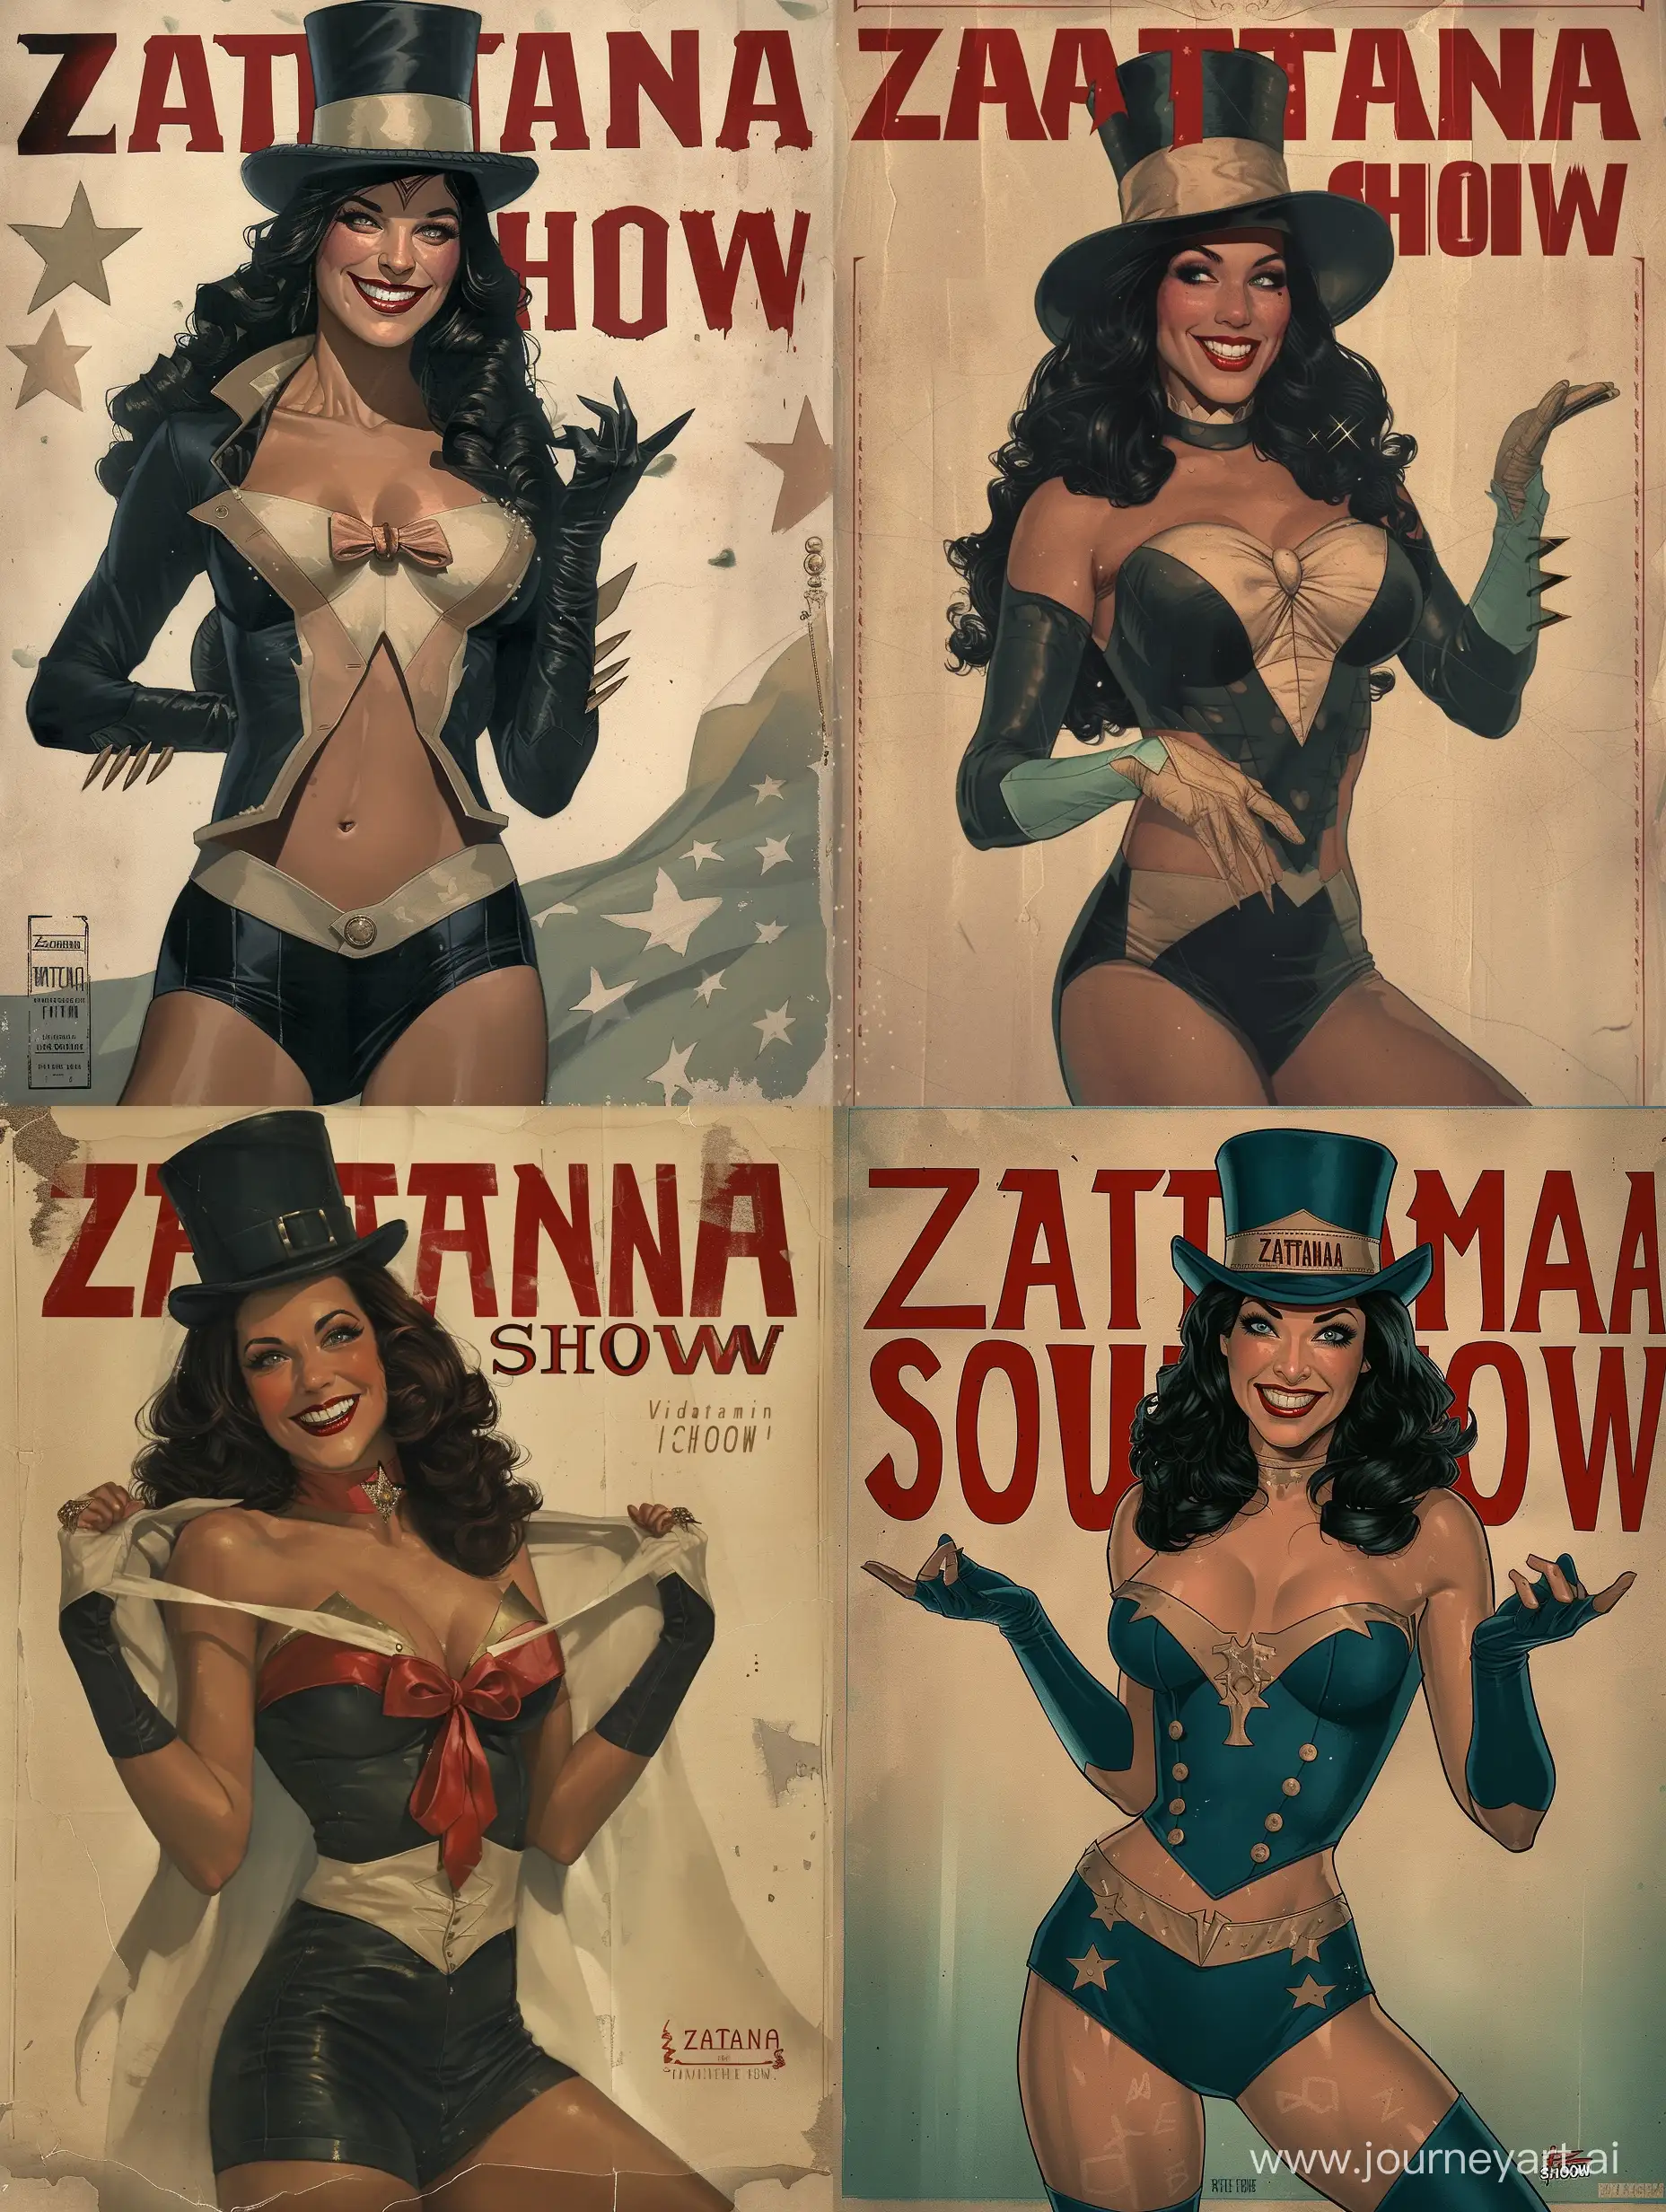 A 50s poster of Zatanna written "Zattana Show", Dc Comics look, Dc Comics 50s costume, 50s style, 50s poster, 50s effect, drawing, letters, top hat, American poster style, smile, heroine , DC Comics